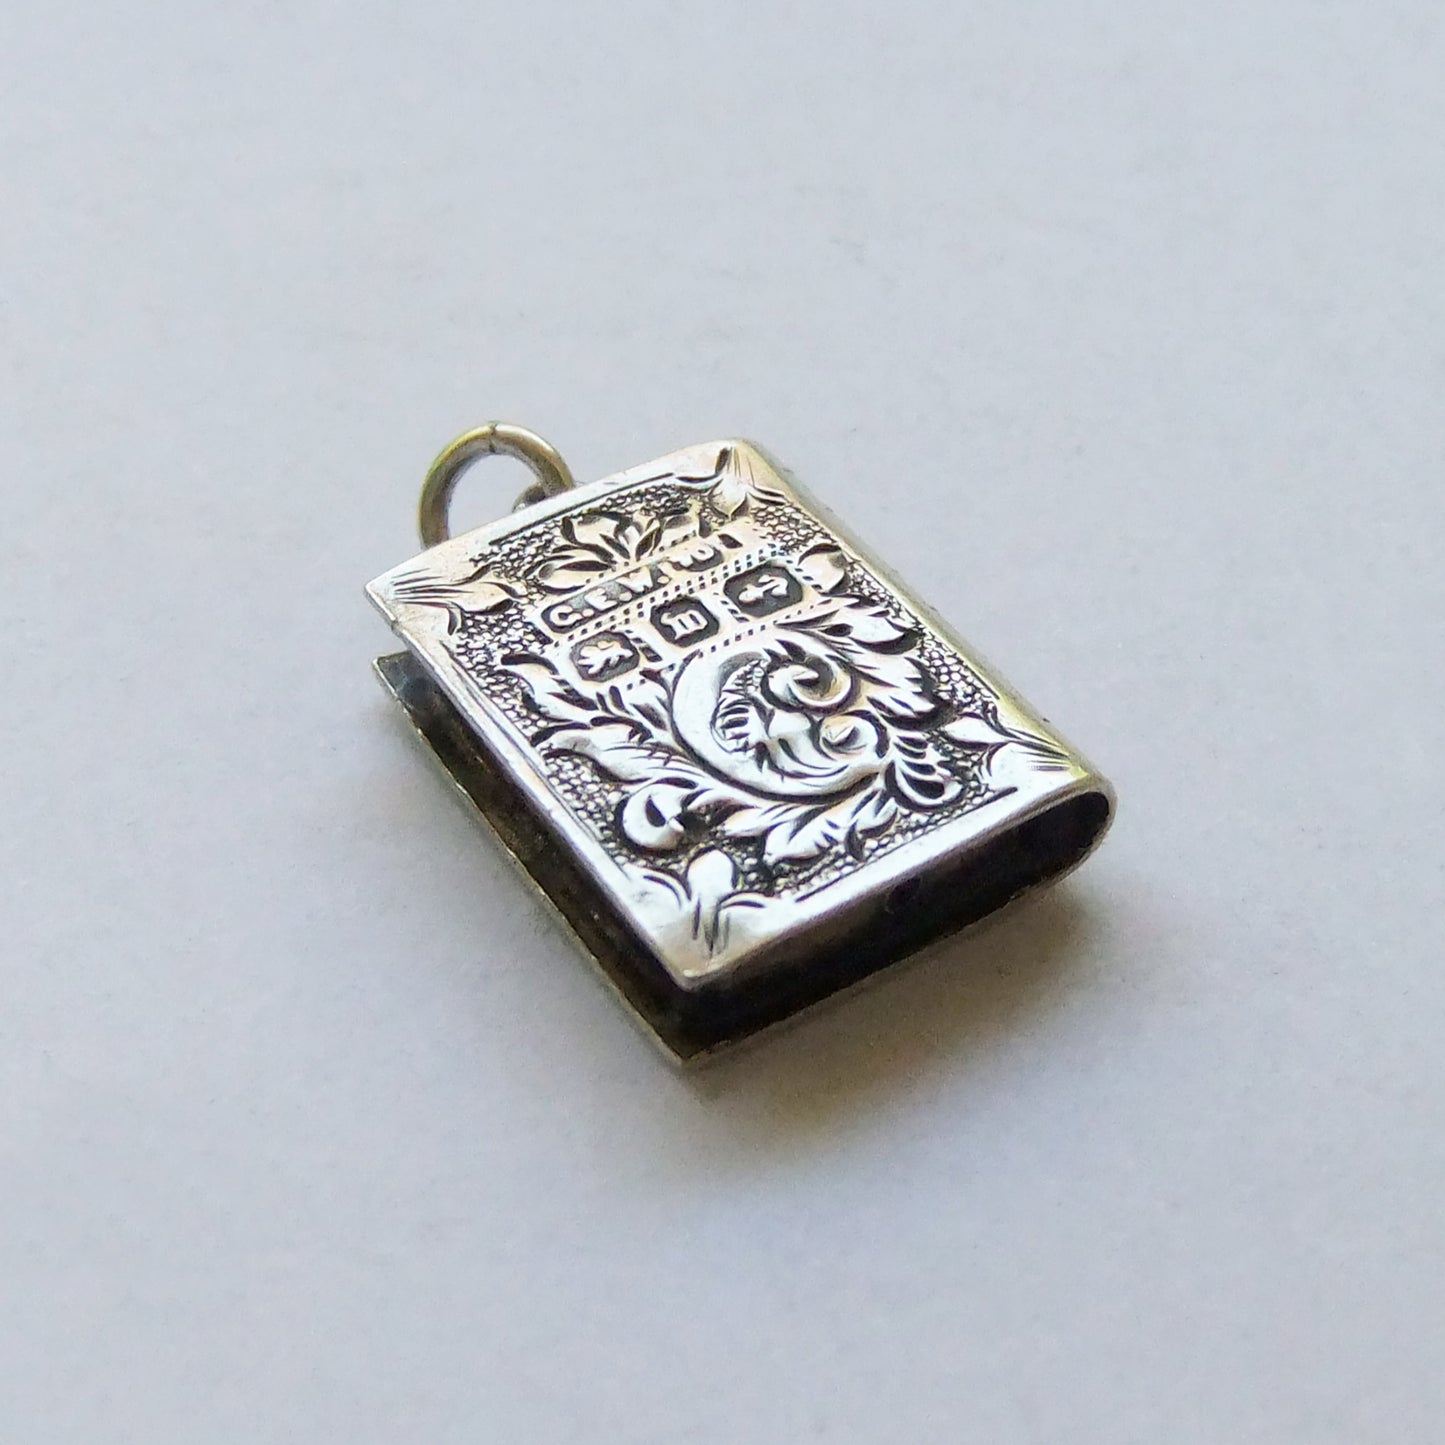 Victorian Book Pendant Silver Victorian Engraved Charm